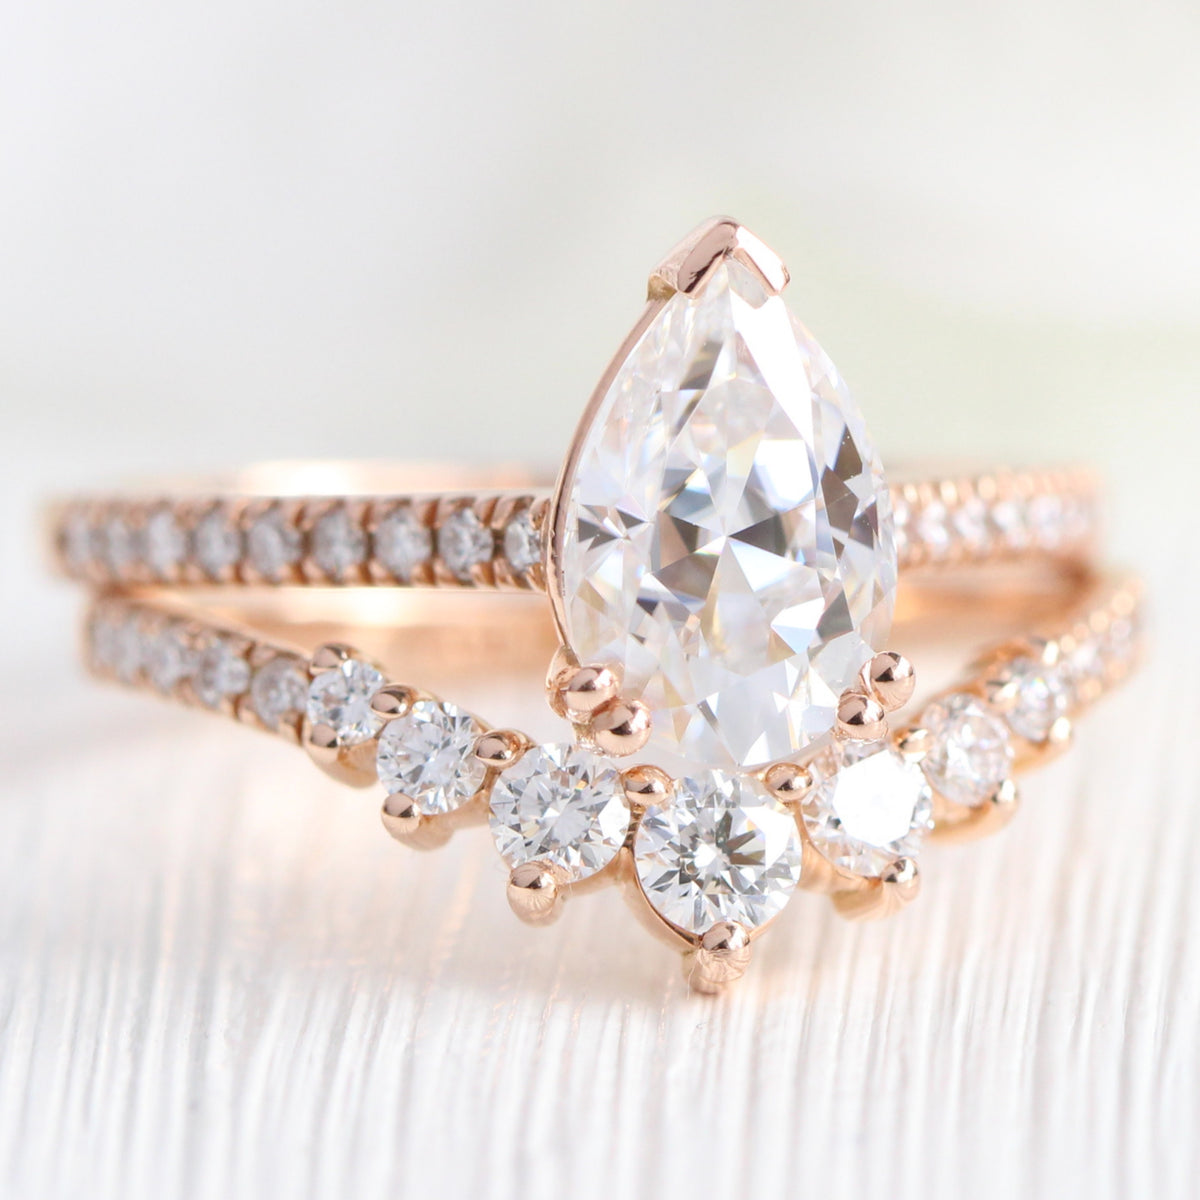 Pear moissanite solitaire ring rose gold curved diamond wedding ring set la more design jewelry